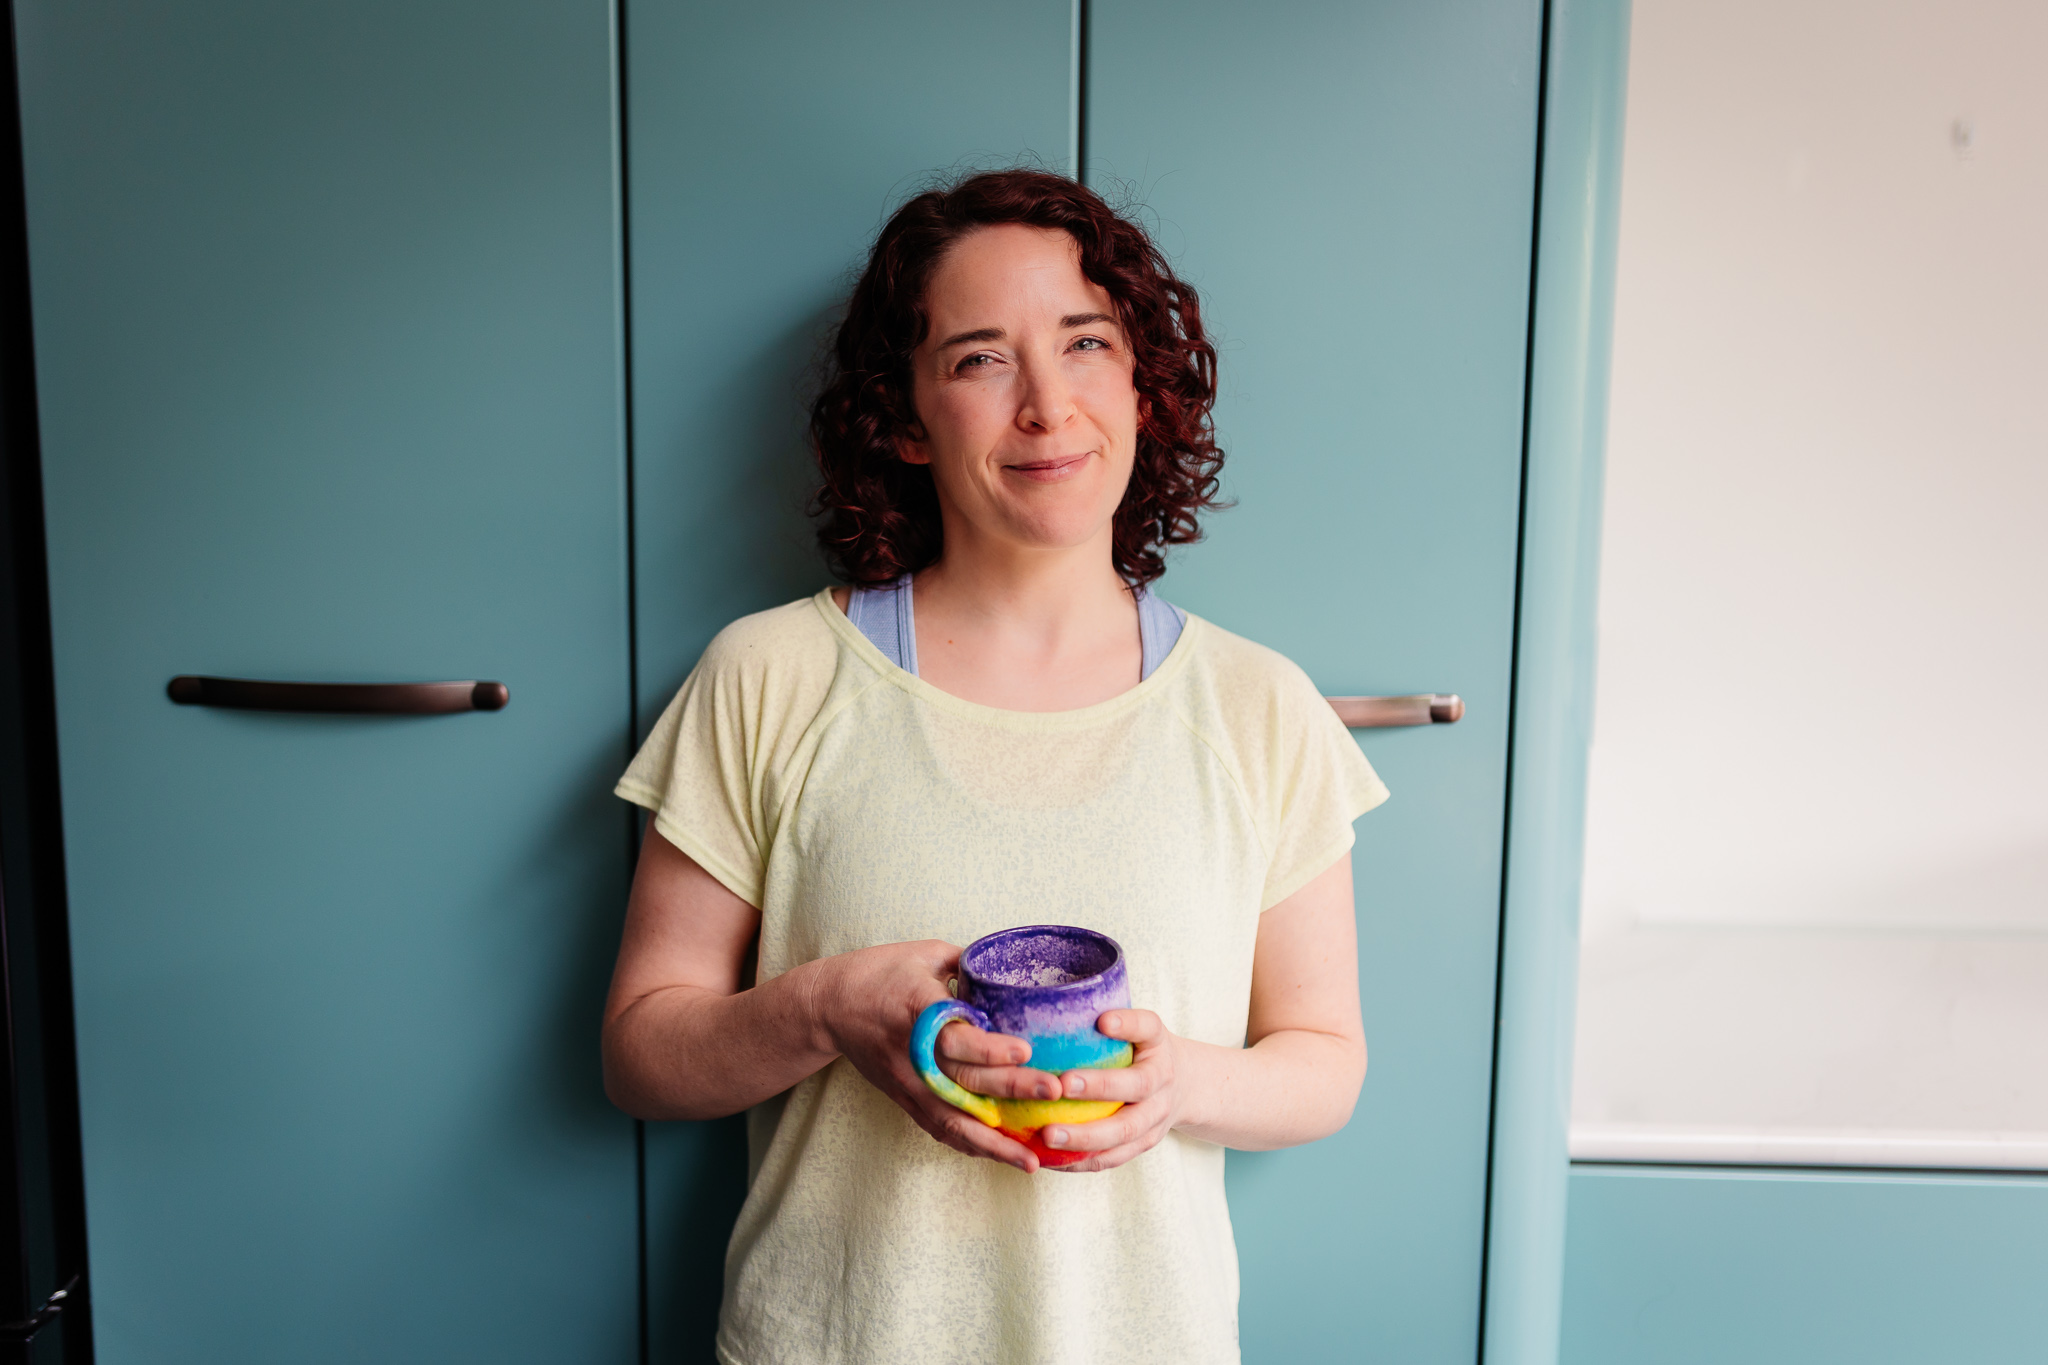 Emmeline Kemp the founder of Green Room Health: A Pilates and Barre Studio in Danbury, Essex. Emmeline is smiling, leaning against a green cupboard, whilst holding a rainbow coffee cup.